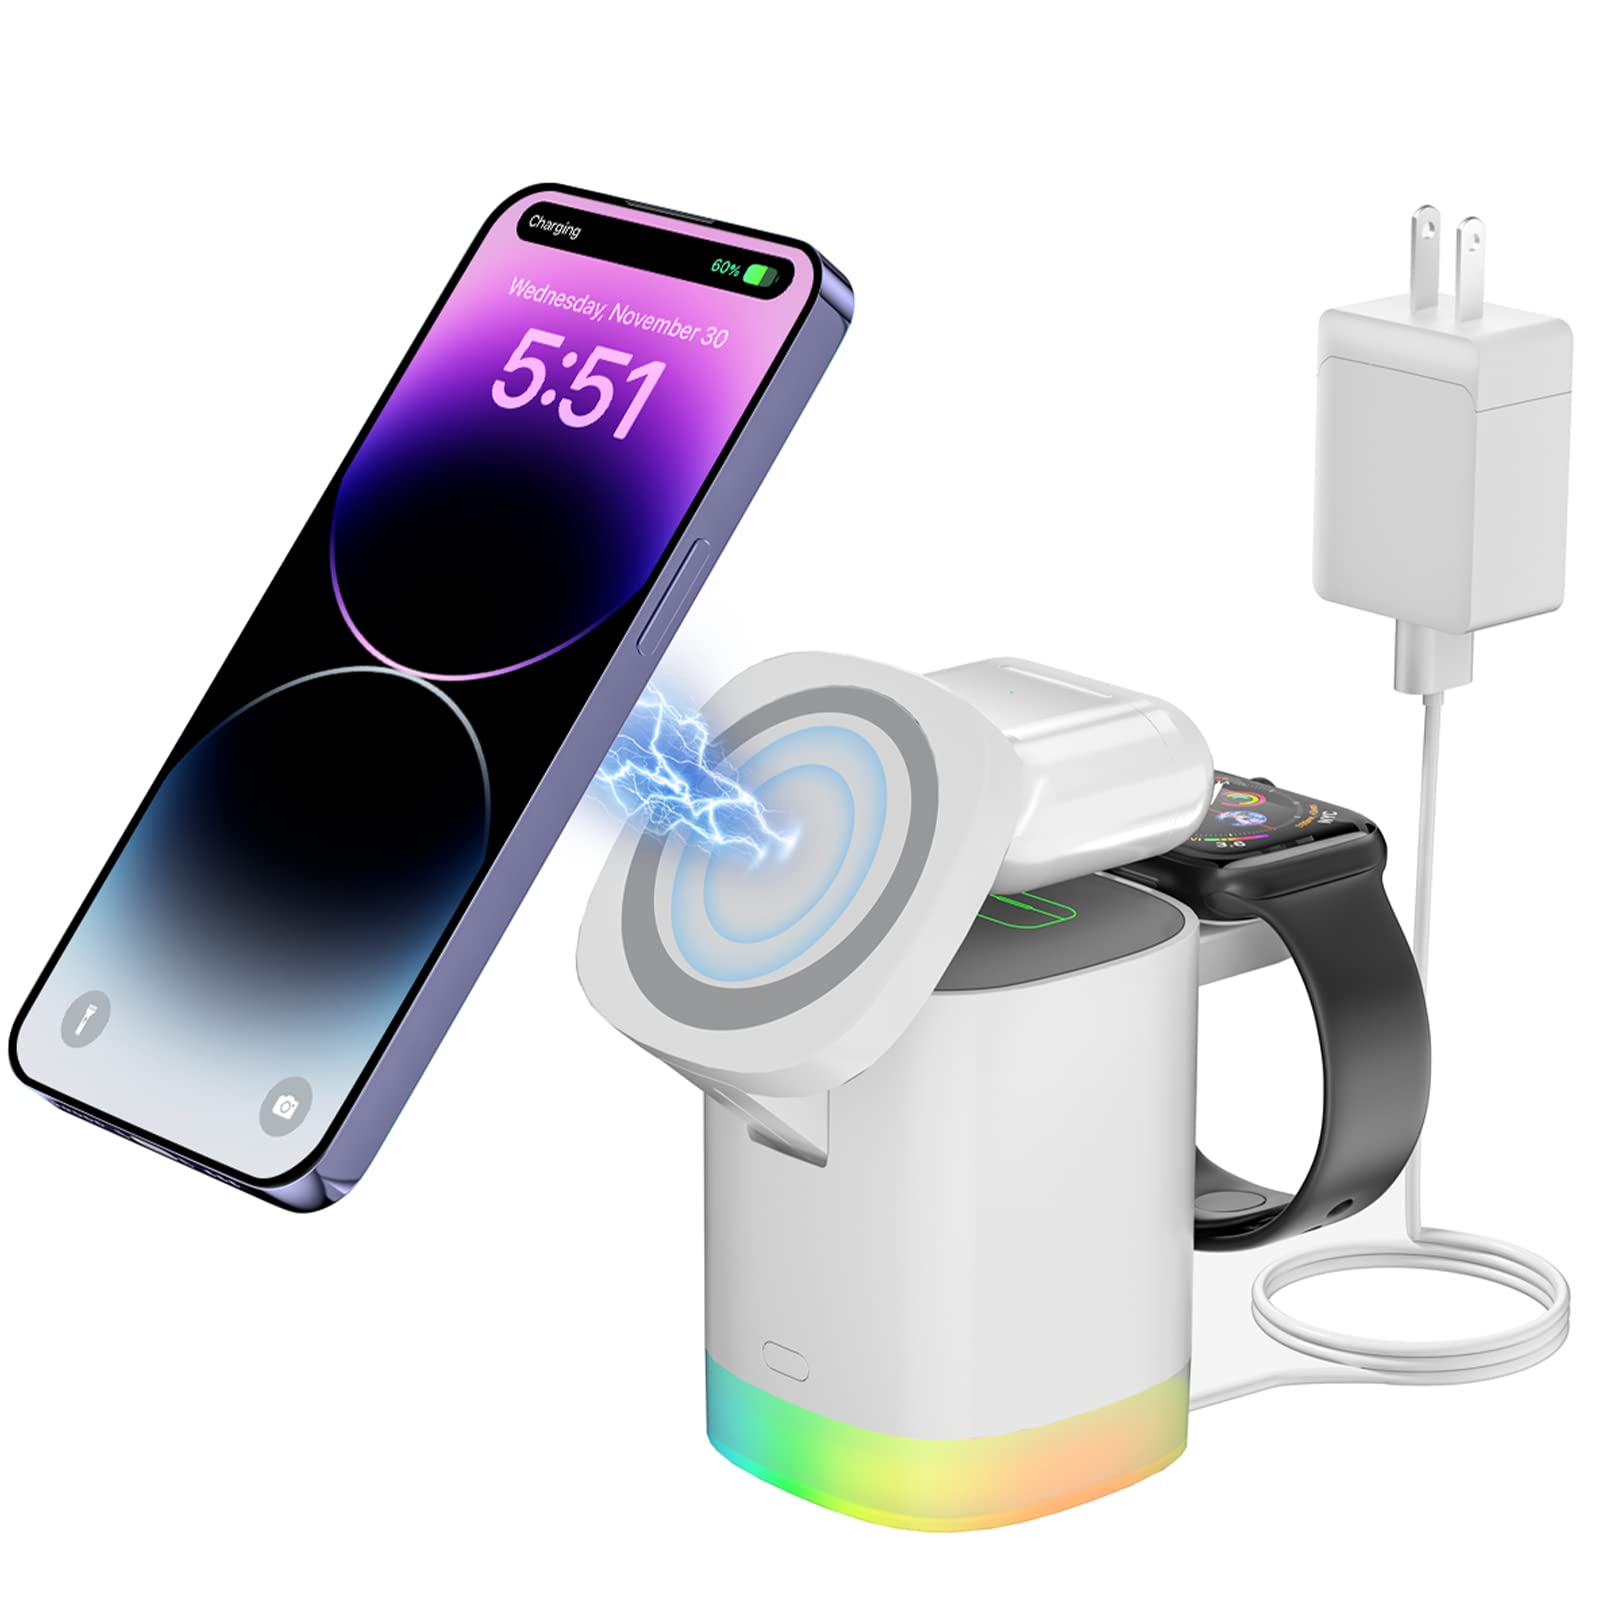 3-in-1 iPhone and Android Qi Compatible Wireless Charging Cube Station for Phone, Earphones, and Watch